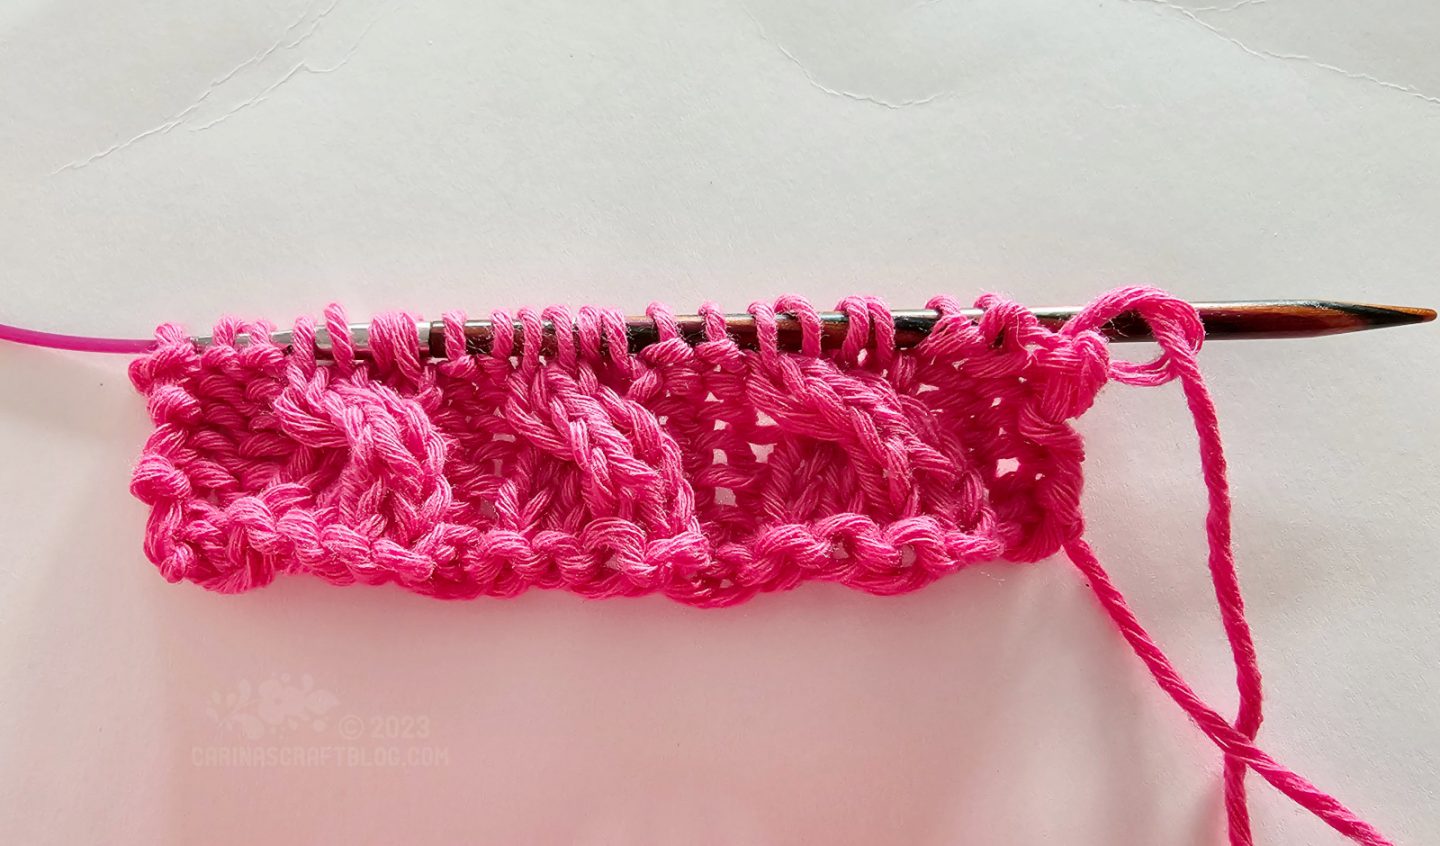 Overhead view of a short piece of knitting using hot pink year.